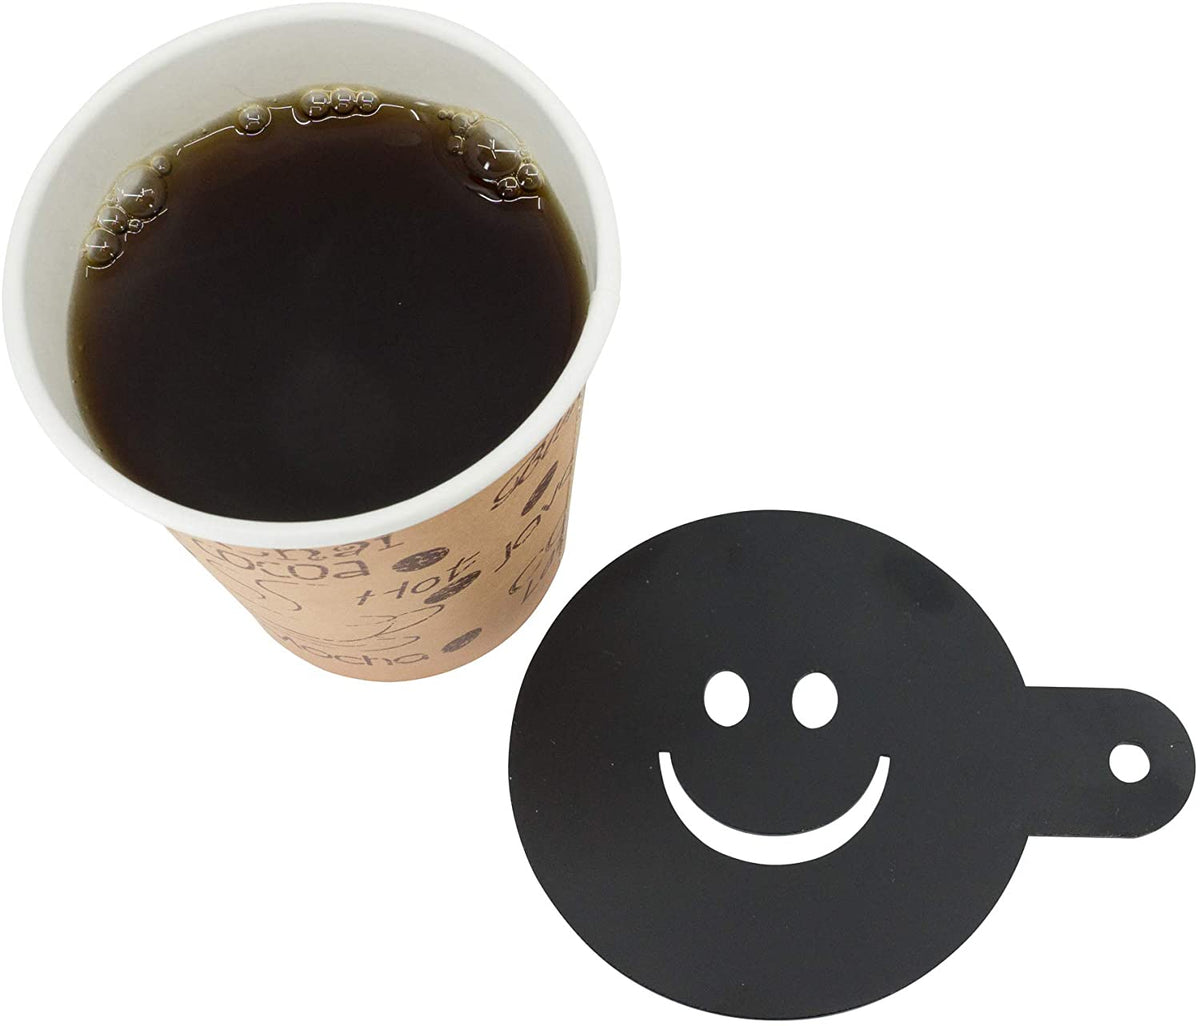 20 Ounce Disposable Paper Coffee Hot Cups with Black Lids - 50 Sets - Coffee Latte Macchiato to Go Extra Large Portion